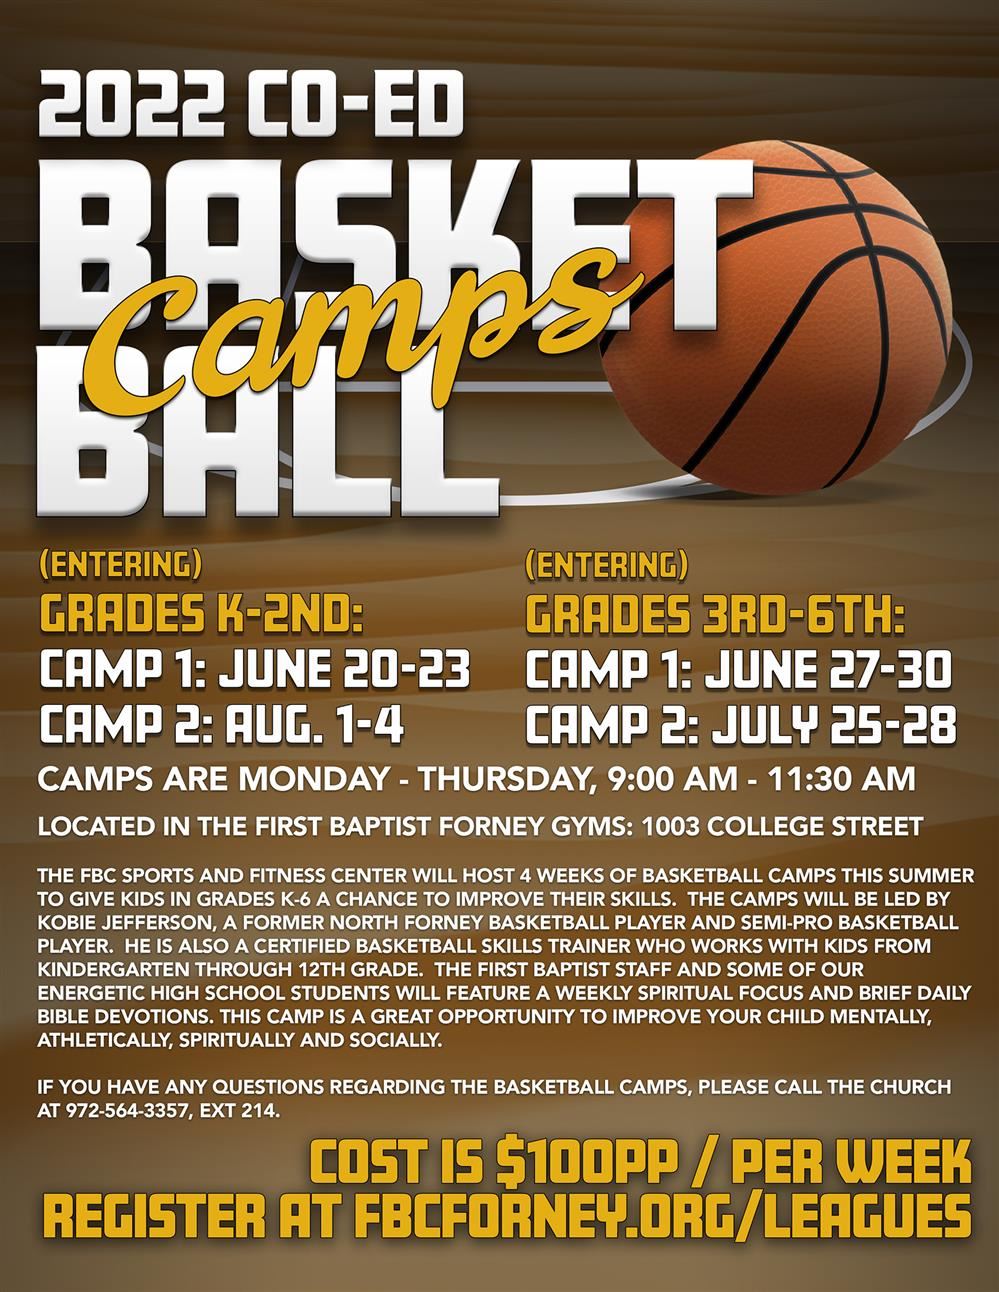 FBC Forney Basketball Camps